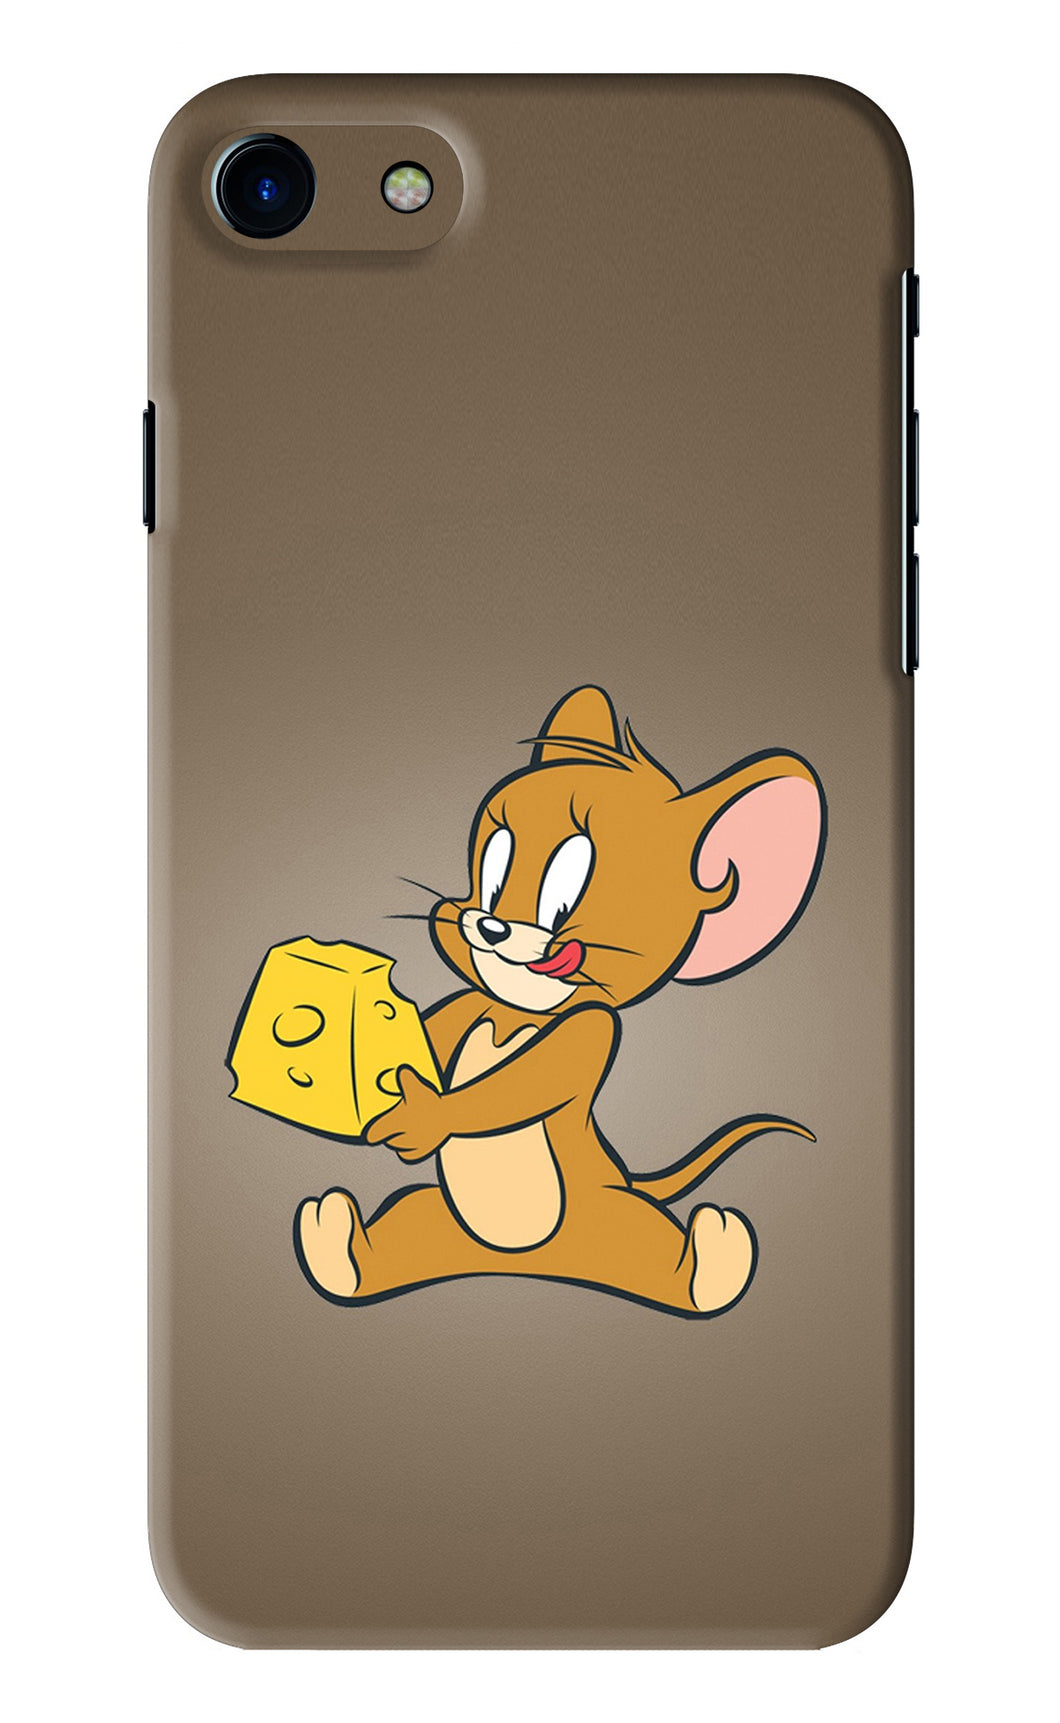 Jerry iPhone 7 Back Skin Wrap